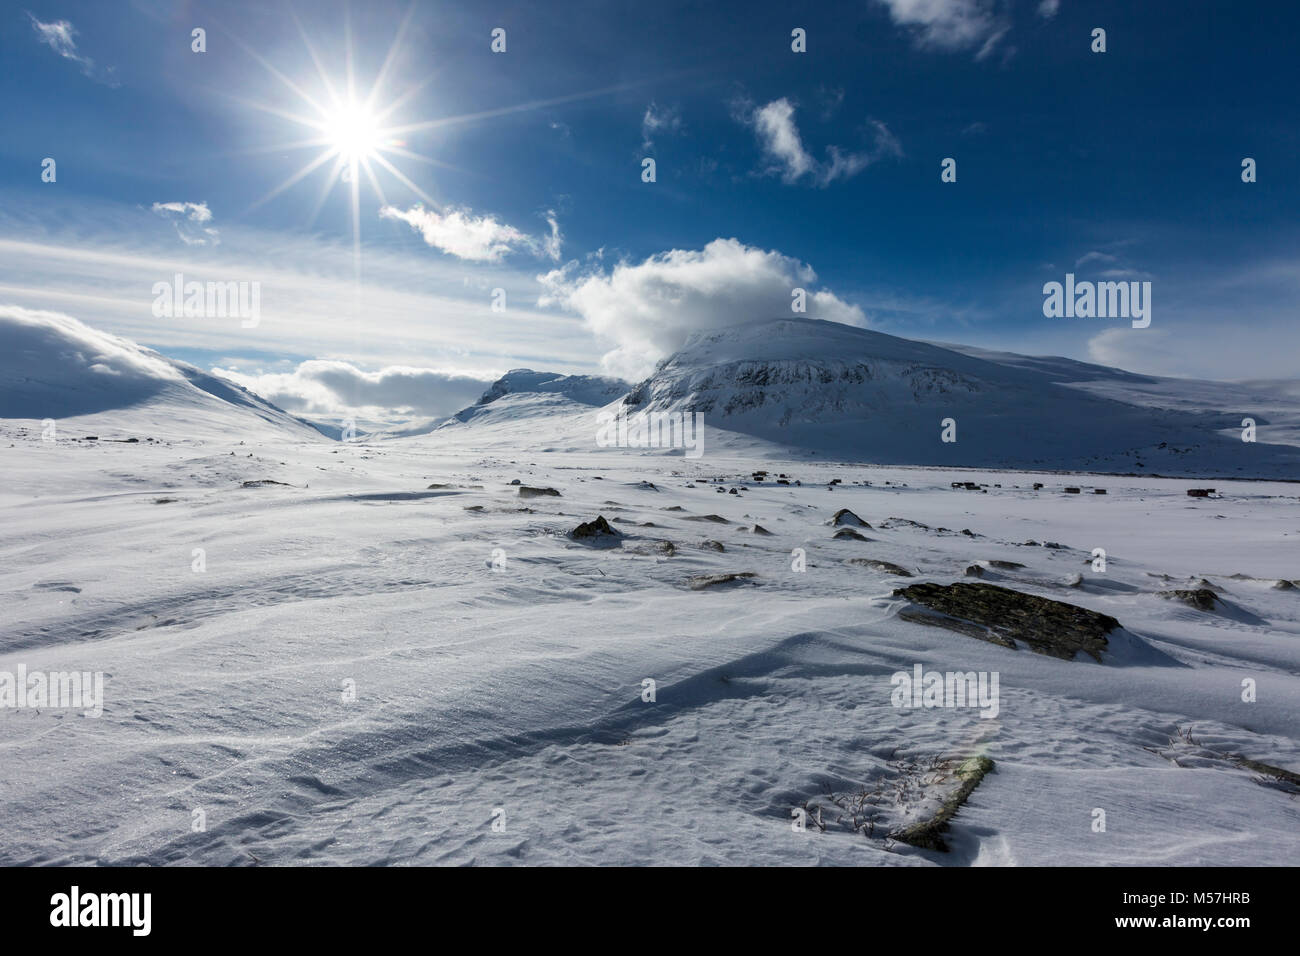 Mountain landscape and mountains in the snow,Tjäktja Pass,Kungsleden or king's trail,Province of Lapland,Sweden Stock Photo